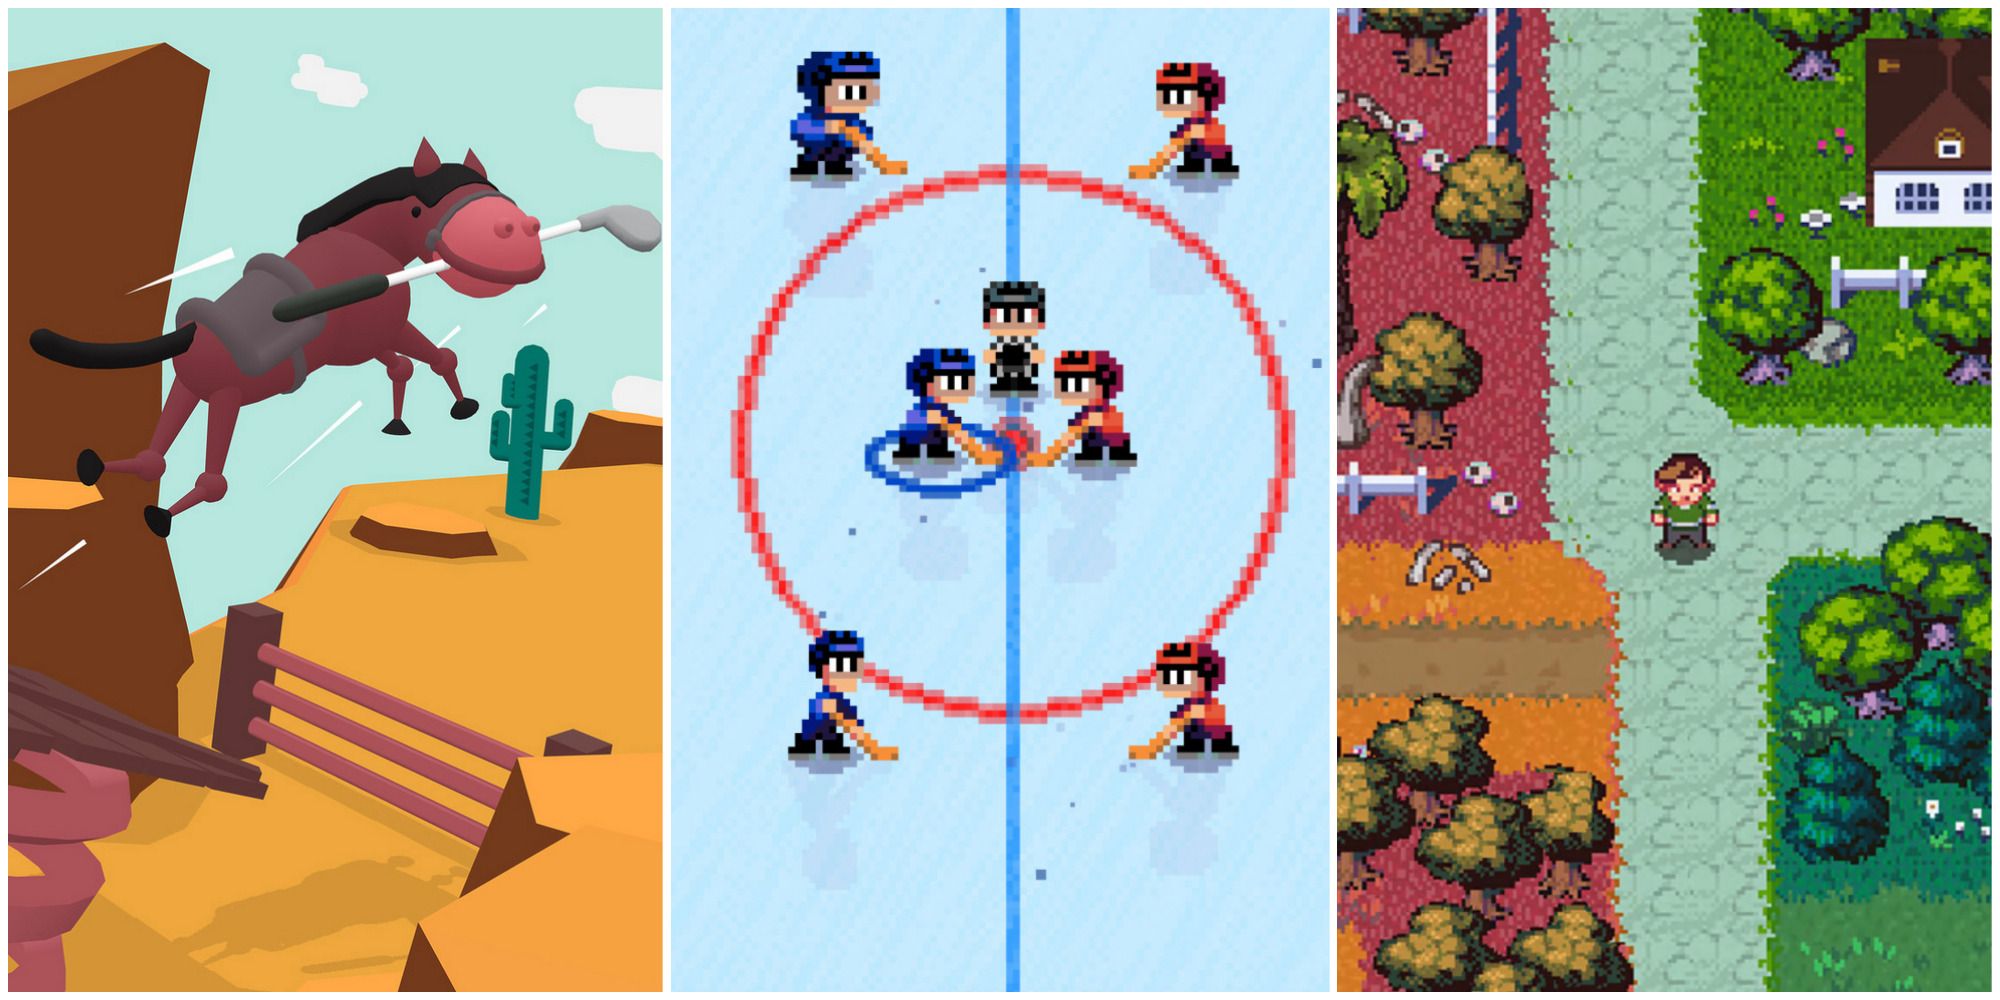 what the golf horse with golf club, super blood hockey game start on rink, golf story character exploring featured